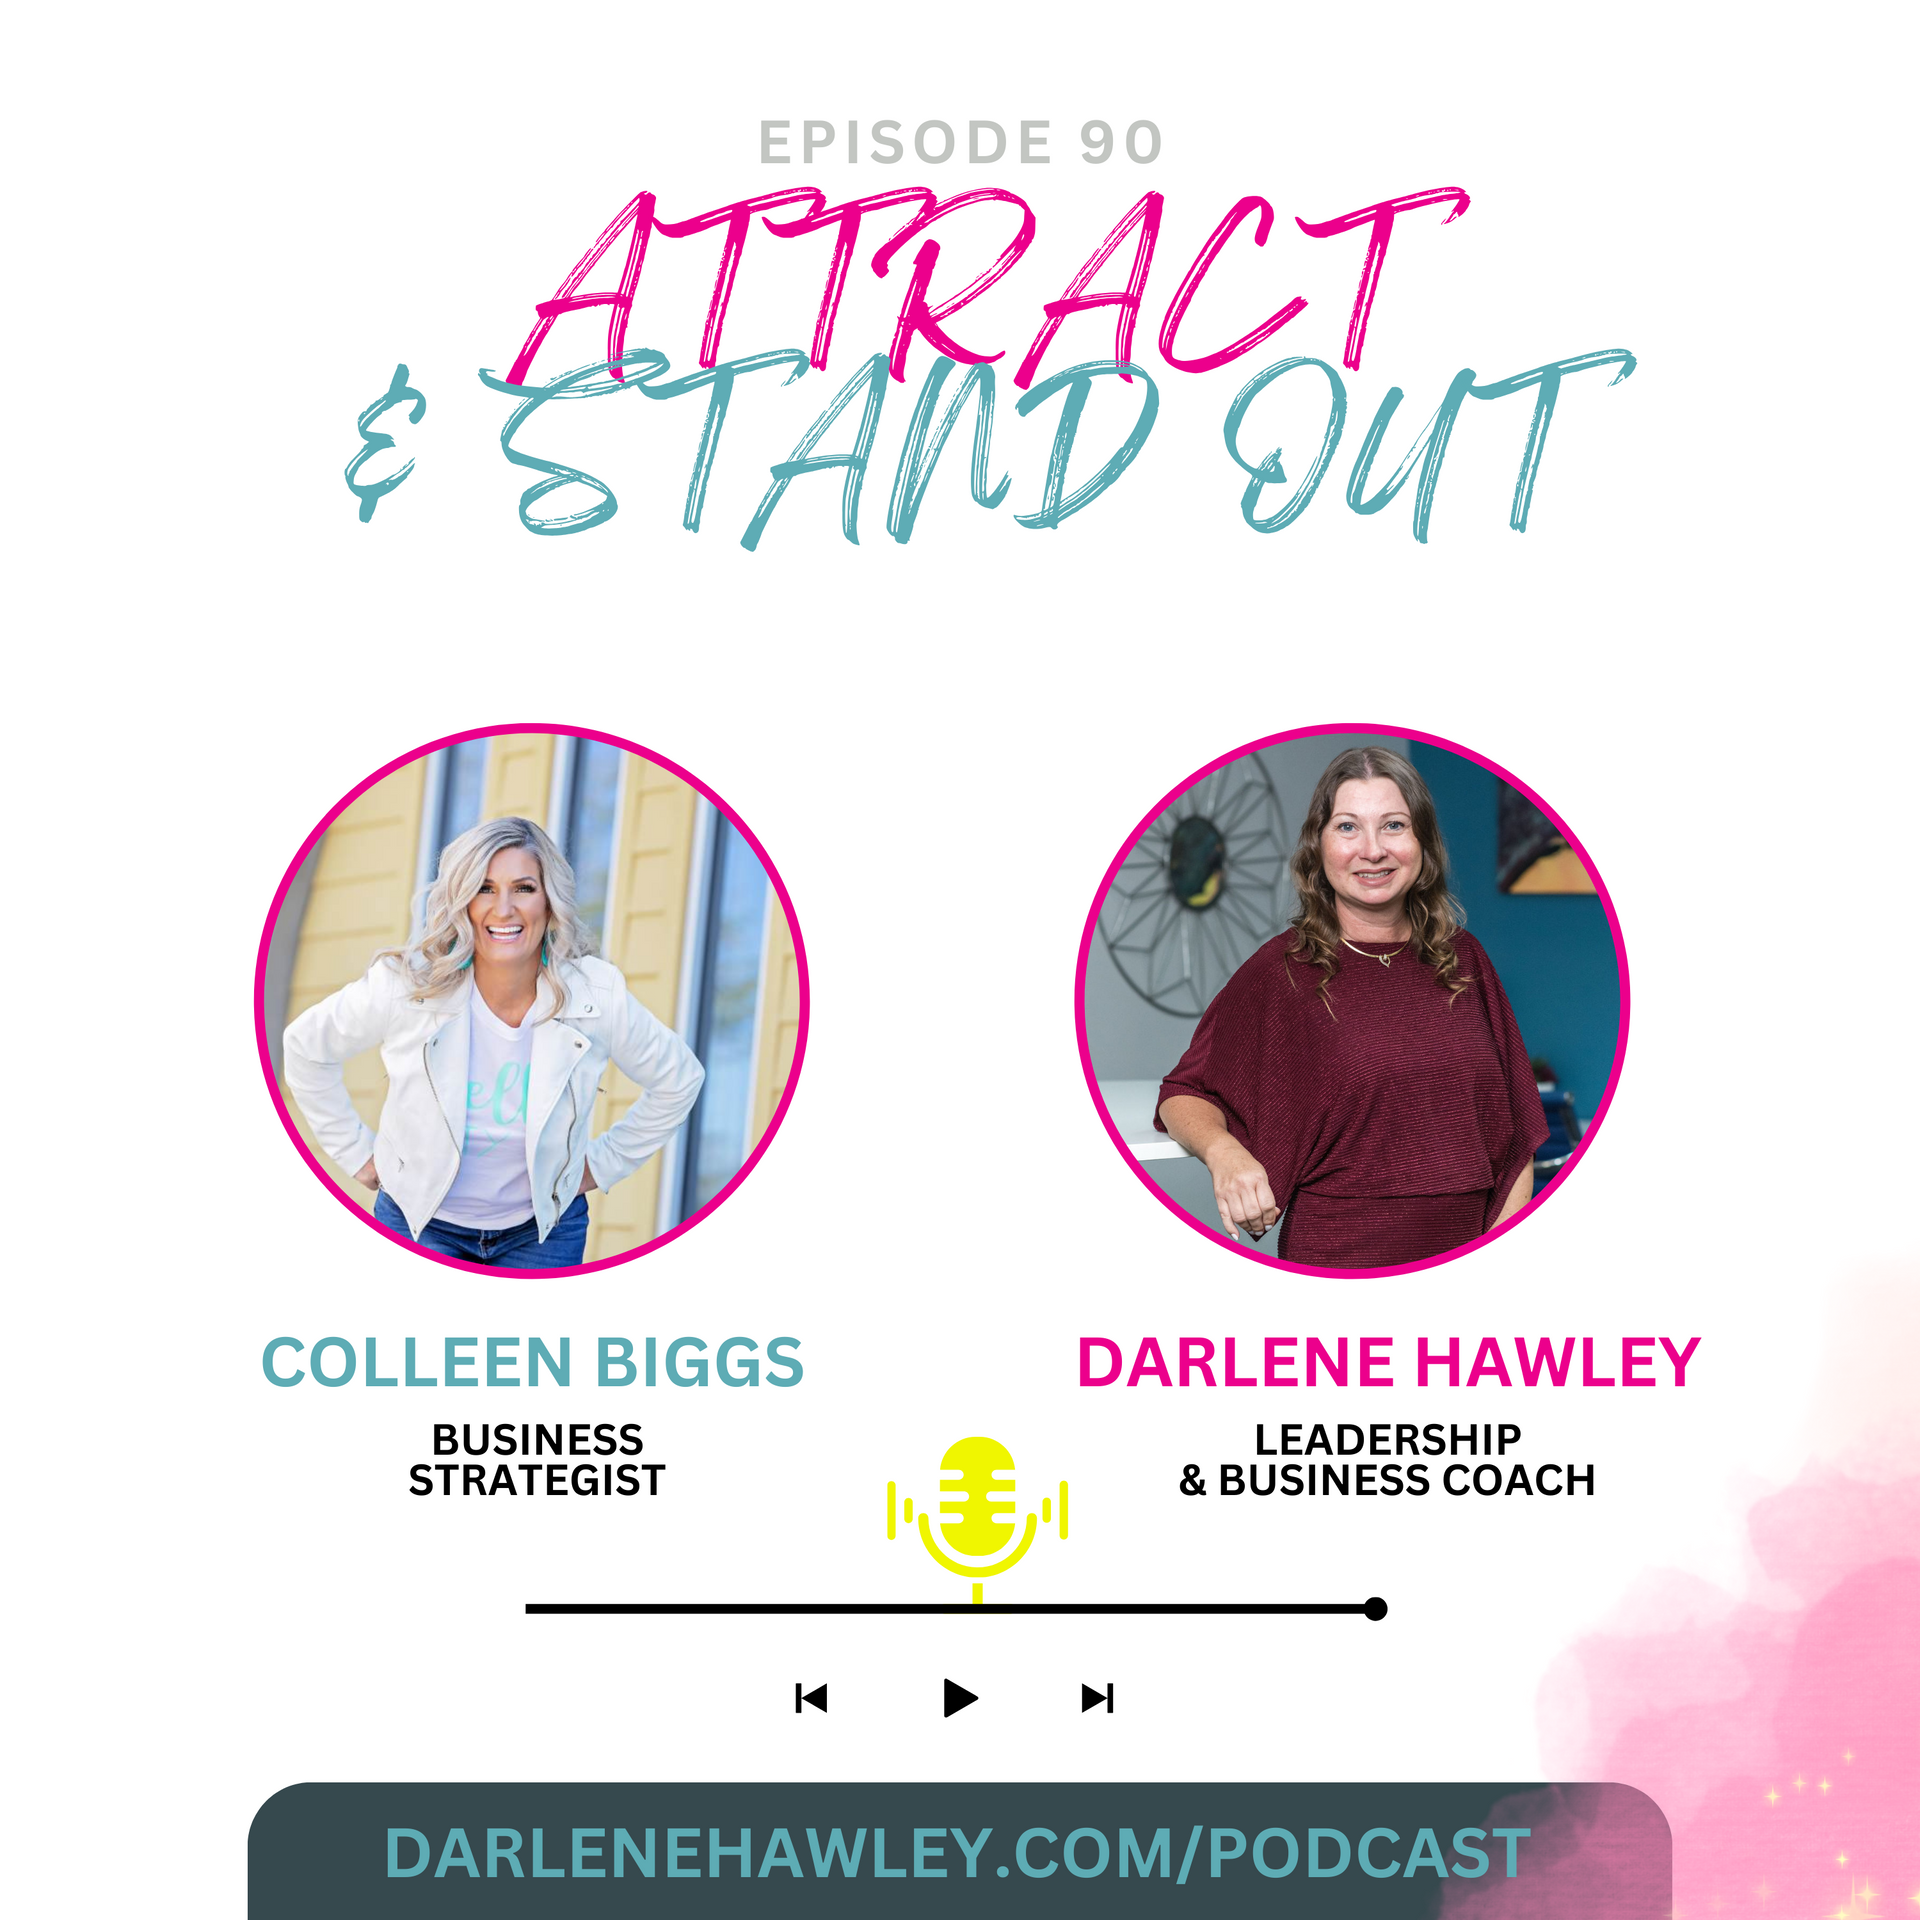 Ep 90 - The Power of Community - Colleen Biggs and Darlene Hawley

